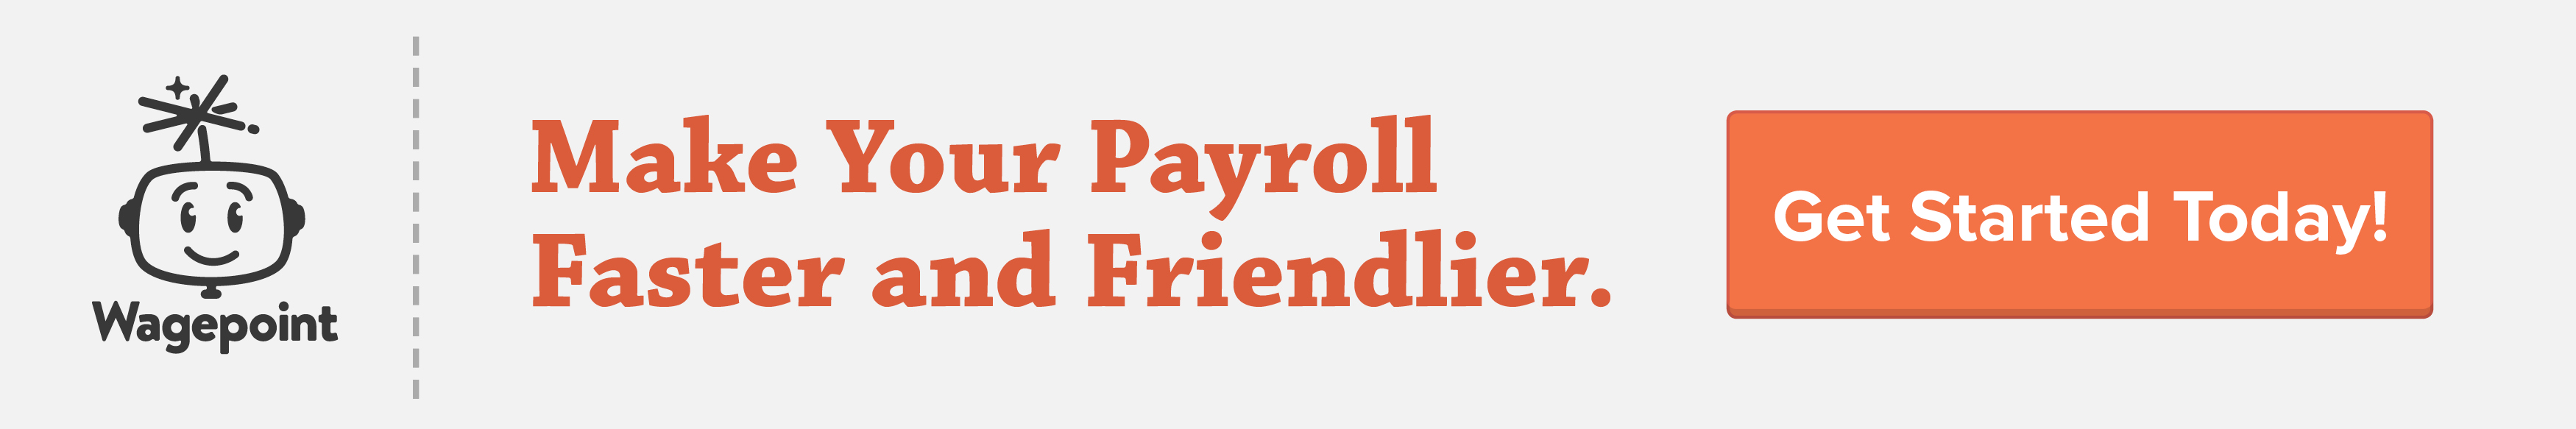 wagepoint payroll frequency get started banner